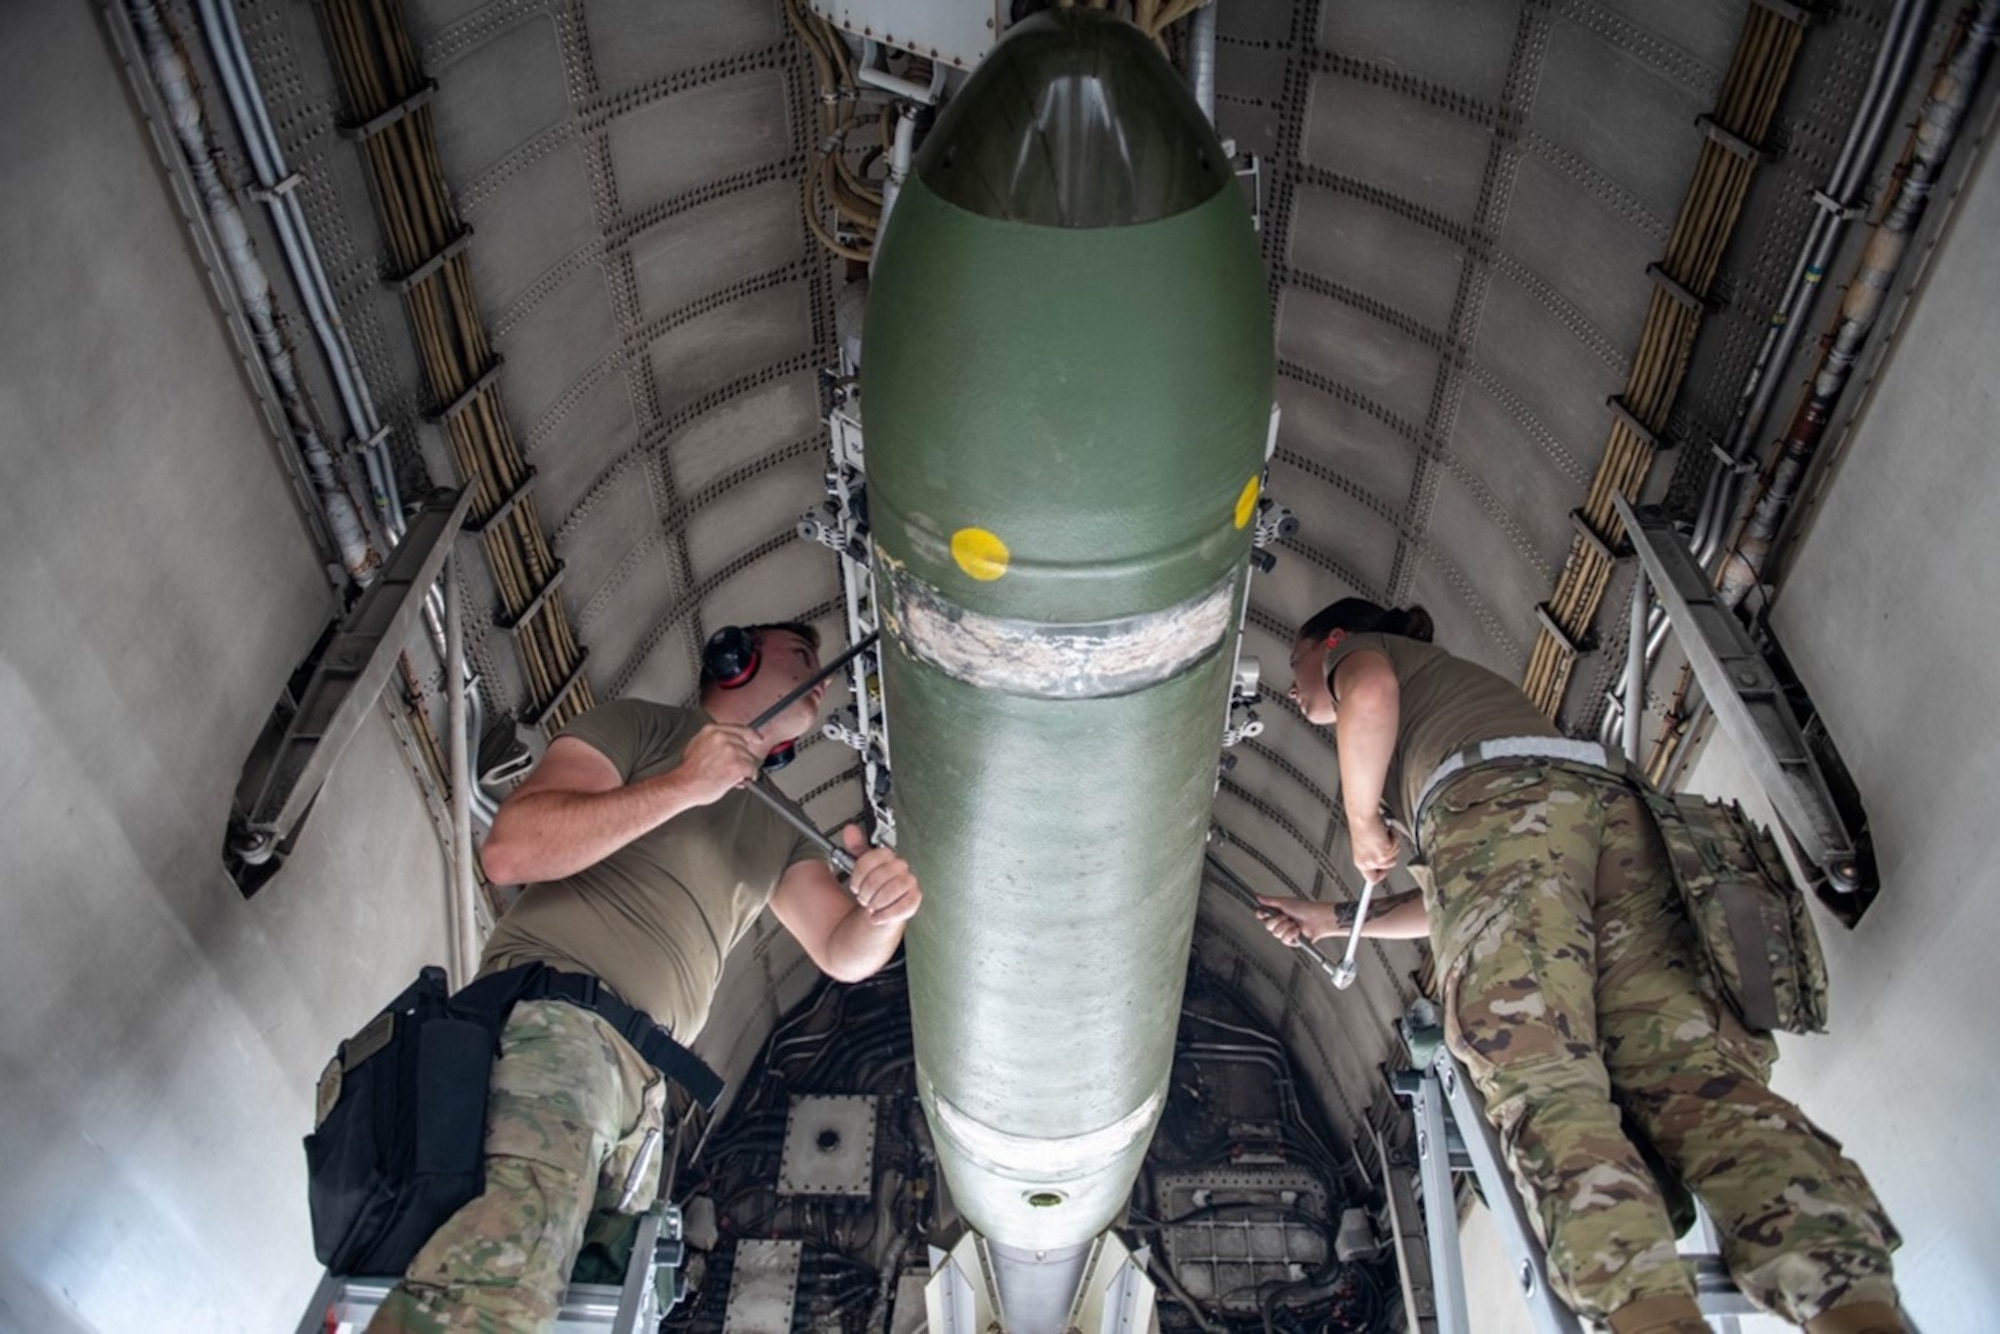 Staff Sgt. Shay Johnson, 28th Aircraft Maintenance Squadron load crew chief, and Senior Airman Makayla Singer, 28th AMXS  load crew member, attach a Mark-65 Quickstrike mine to a munitions rack at Ellsworth Air Force Base, S.D., Aug. 24, 2022.  The 28th Bomb Wing’s integration into the U.S. Navy live-fire mine exercise helped the Navy strengthen naval mine tactics, techniques, and procedures. (U.S. Air Force photo by Senior Airman Quentin K. Marx)